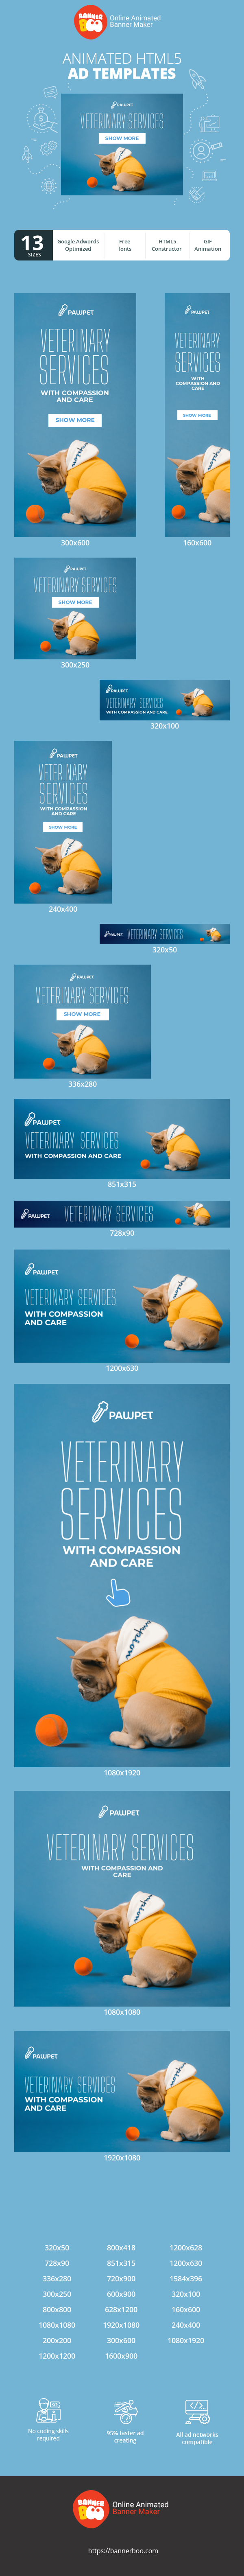 Szablon reklamy banerowej — Veterinary Services — With Compassion And Care